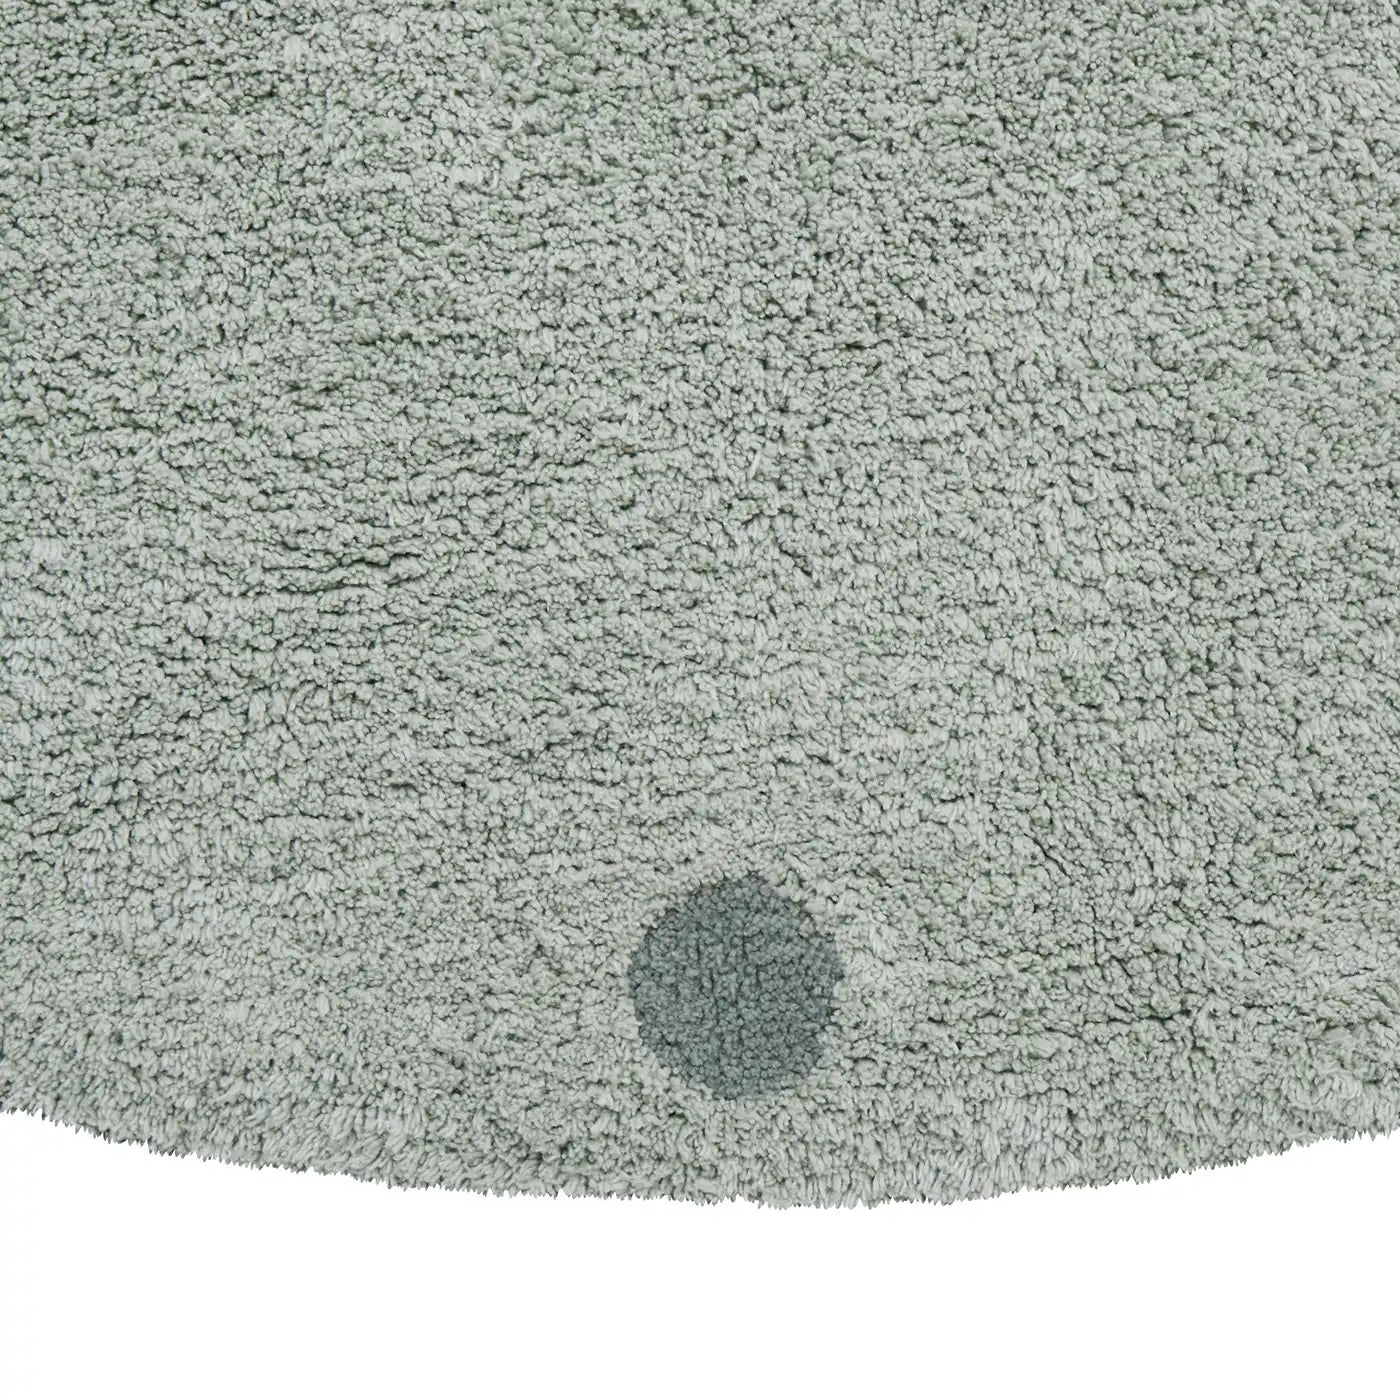 Lorena Canals Round Dot Washable Rug - Blue Sage (Mushroom hunters / Forest finds Collection)